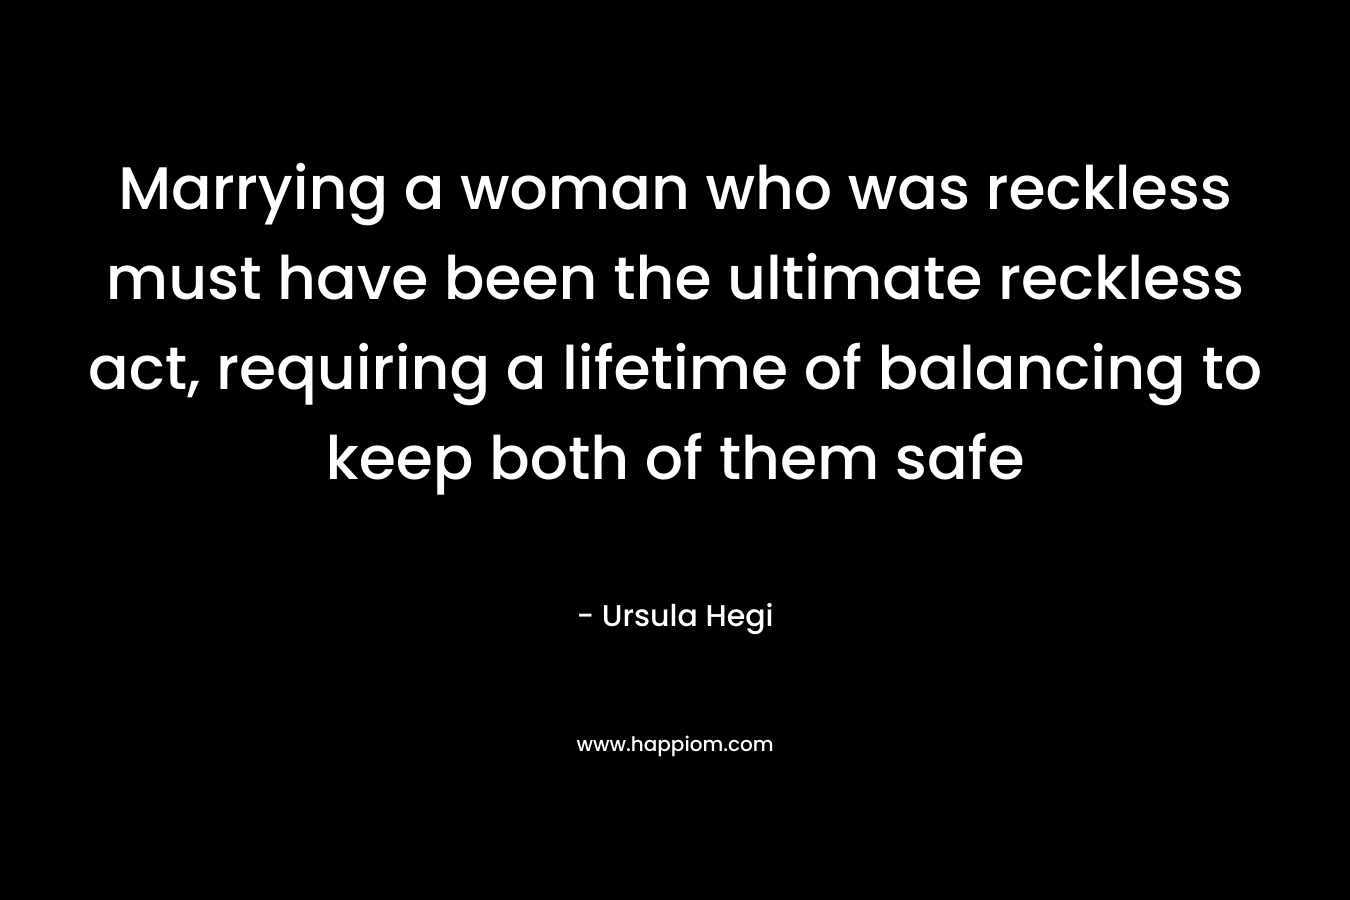 Marrying a woman who was reckless must have been the ultimate reckless act, requiring a lifetime of balancing to keep both of them safe – Ursula Hegi